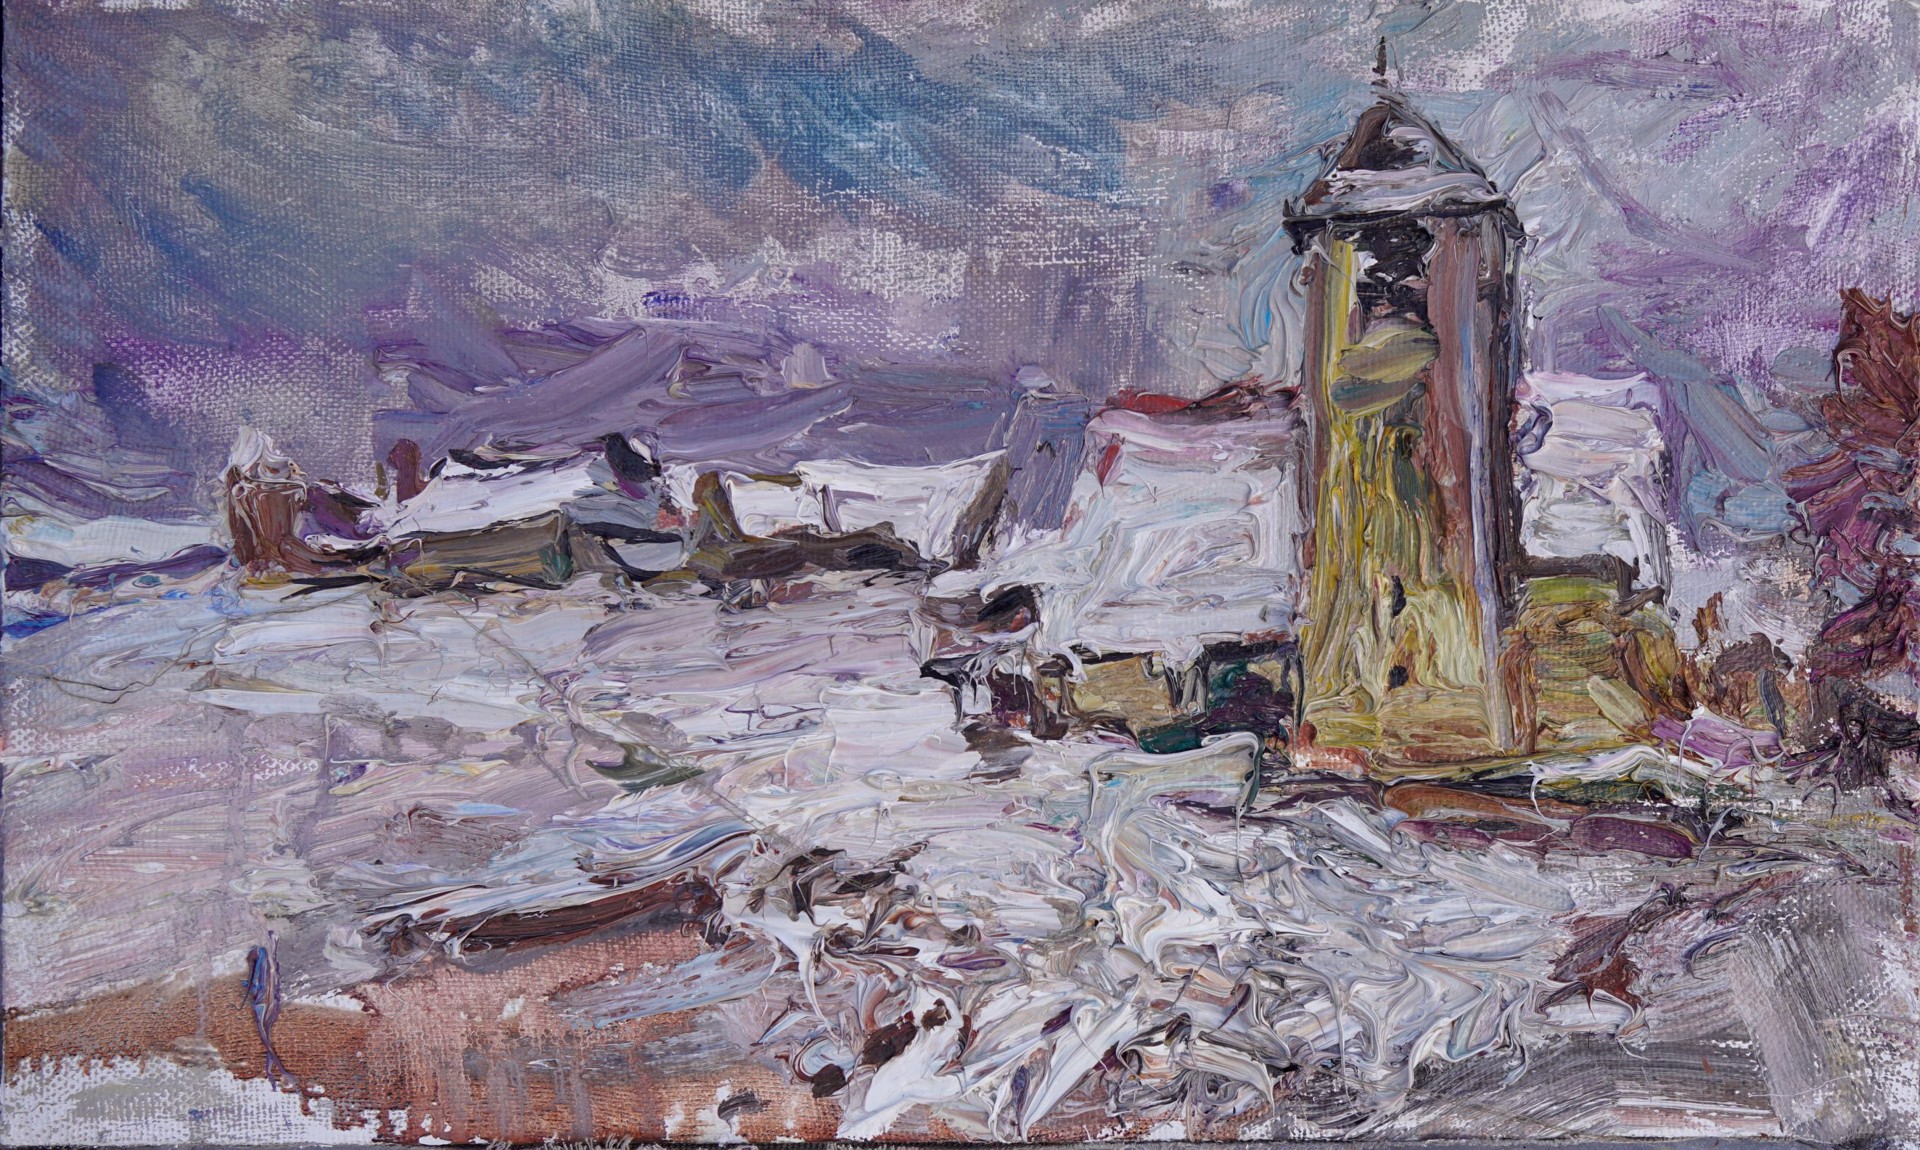 "Church at Chassignelles" original oil painting by Ulrich Gleiter